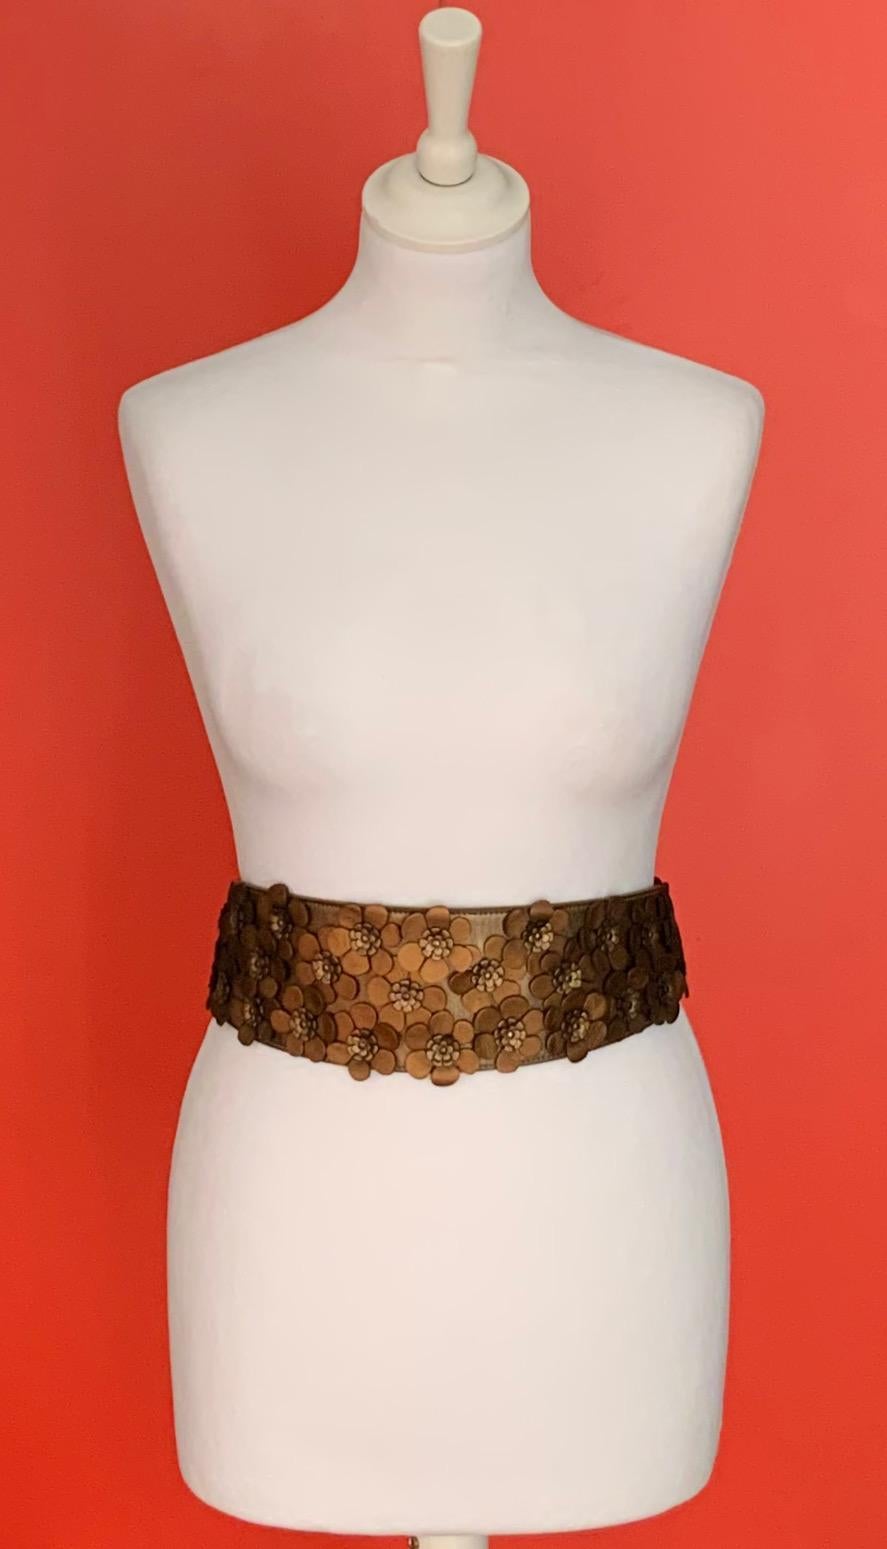 Very elegant belt of the house Azzedine Alaïa crafted in a bronze color leather garnished with a multitude of flowers in the same material and tones.

Material: leather
Color: bronze
Hardware: metal
Size: 70
Measurements: Length: 81,5 cms - approx.